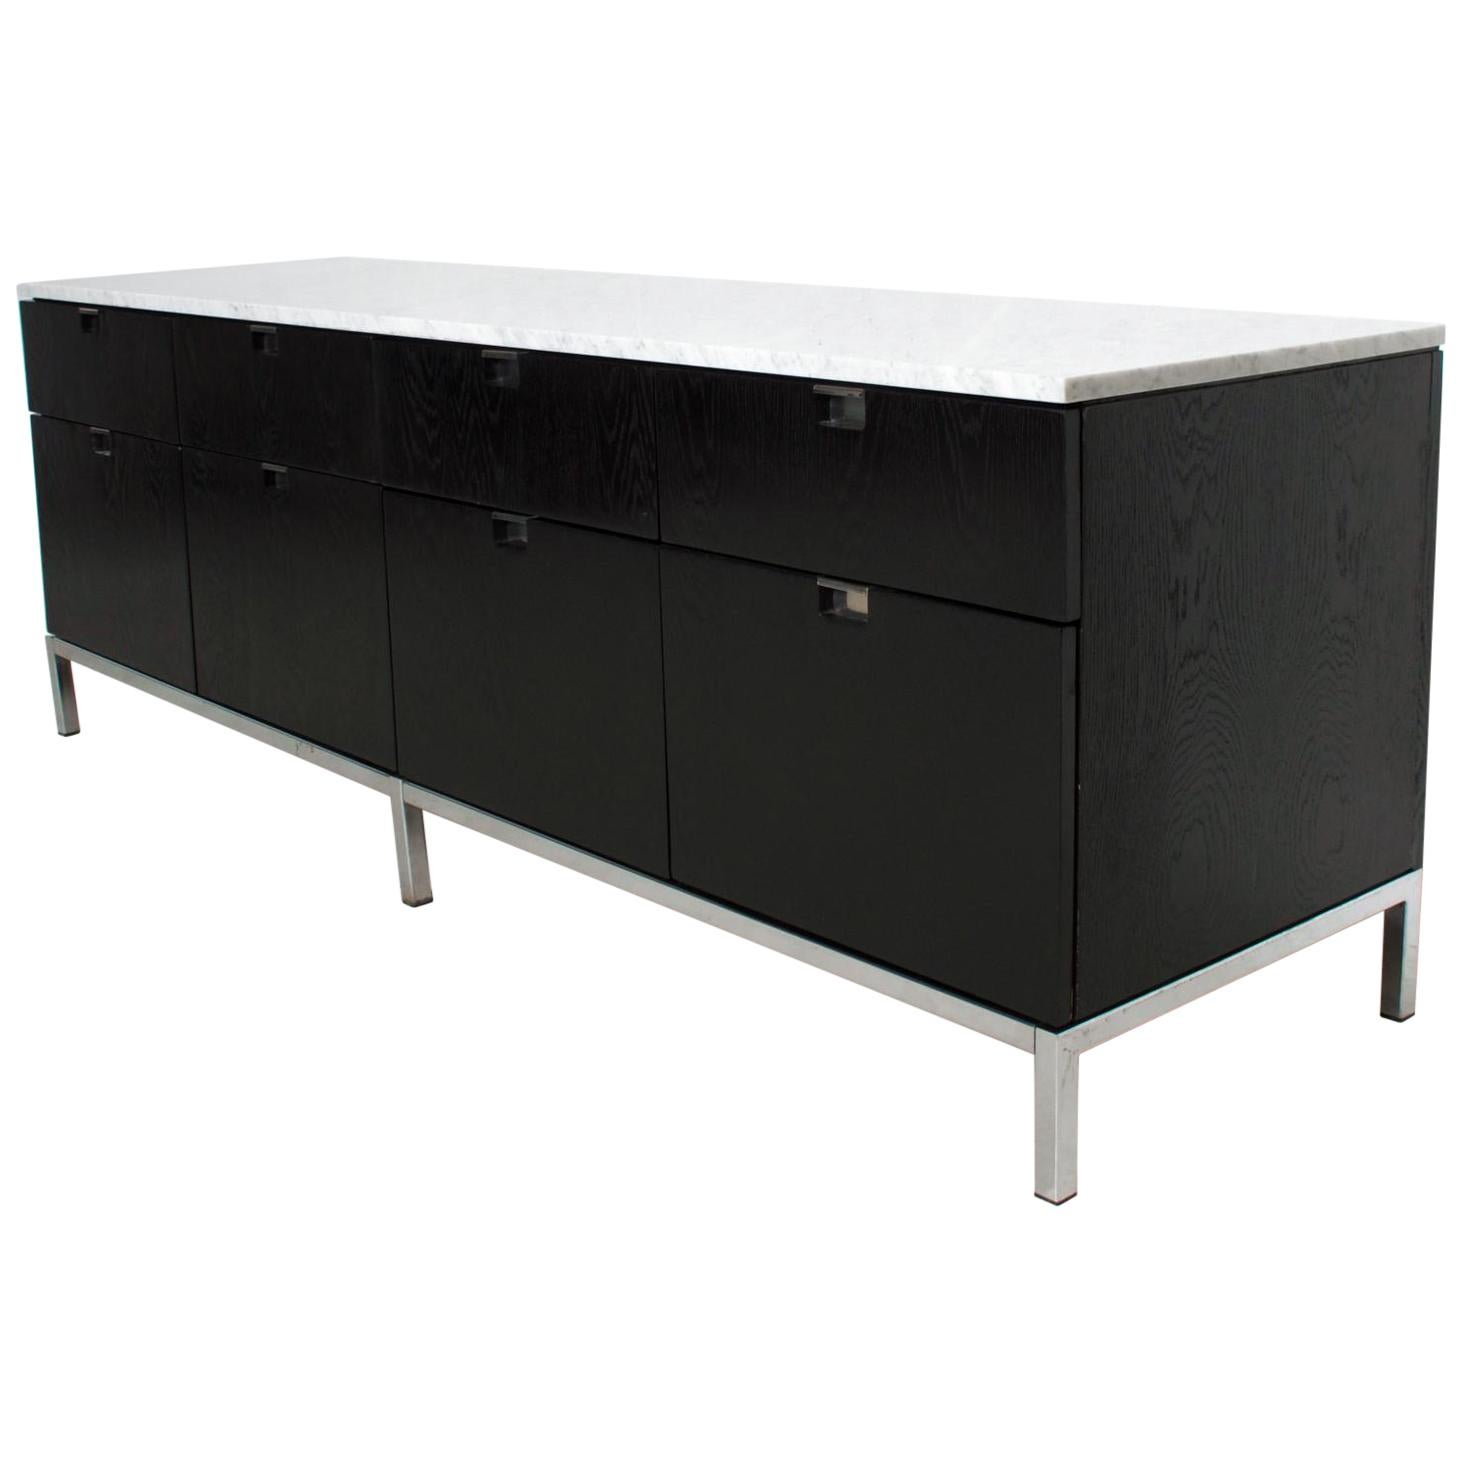  Modern  elegance Florence Knoll credenza cabinet sideboard with white Carrara marble in black oak circa 1960s by Knoll.
Stamped with Knoll label in the upper drawer. Ebonized oak with white Carrara marble top.
Original chrome-plated base. Finished